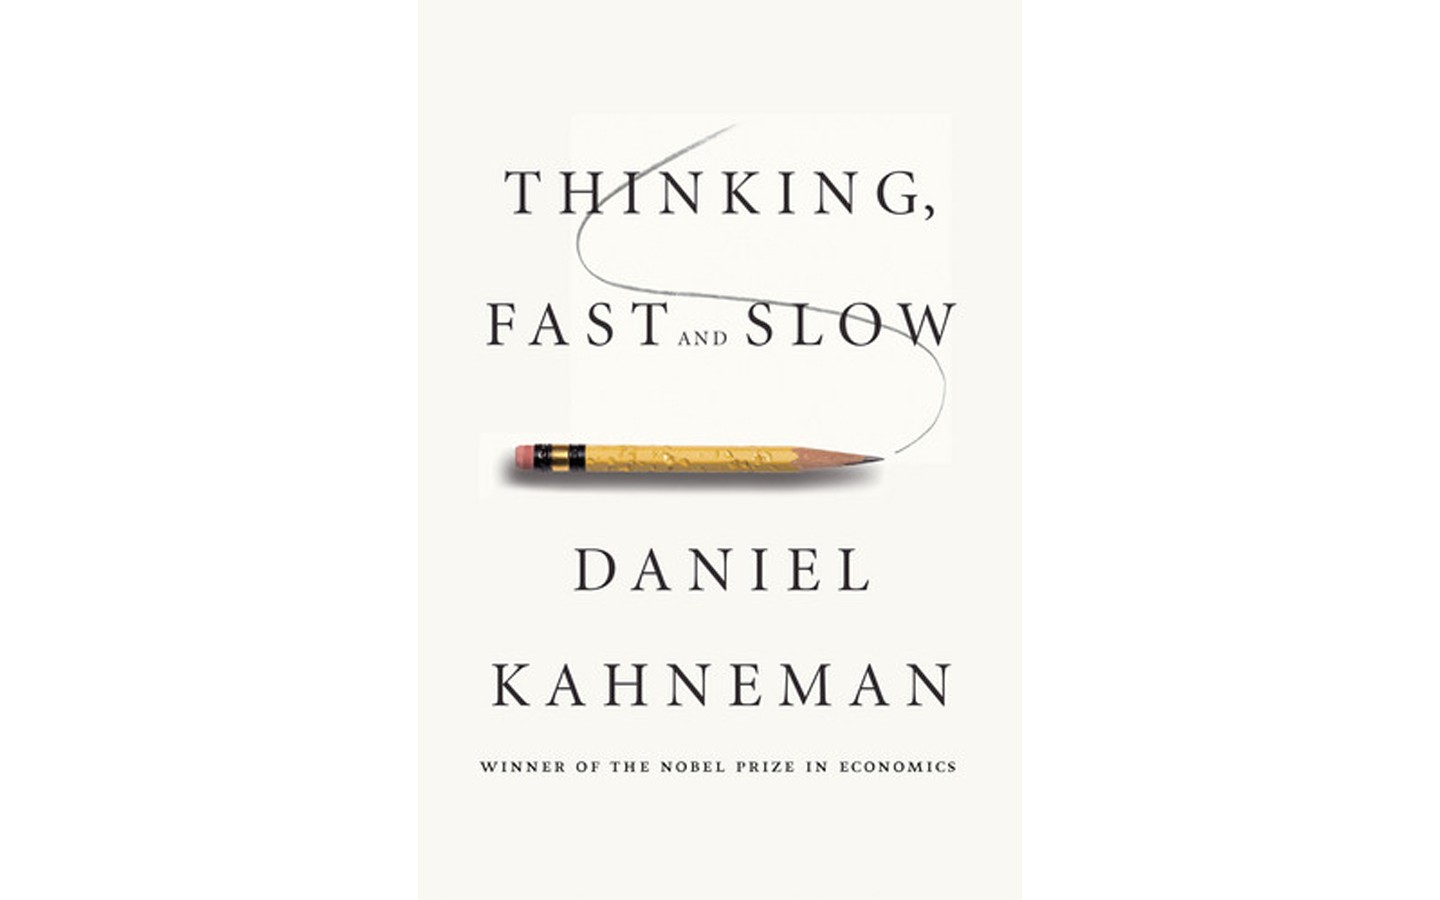 Thinking, Fast and Slow - BY DANIEL KAHNEMAN - FARRAR, STRAUS AND GIROUX